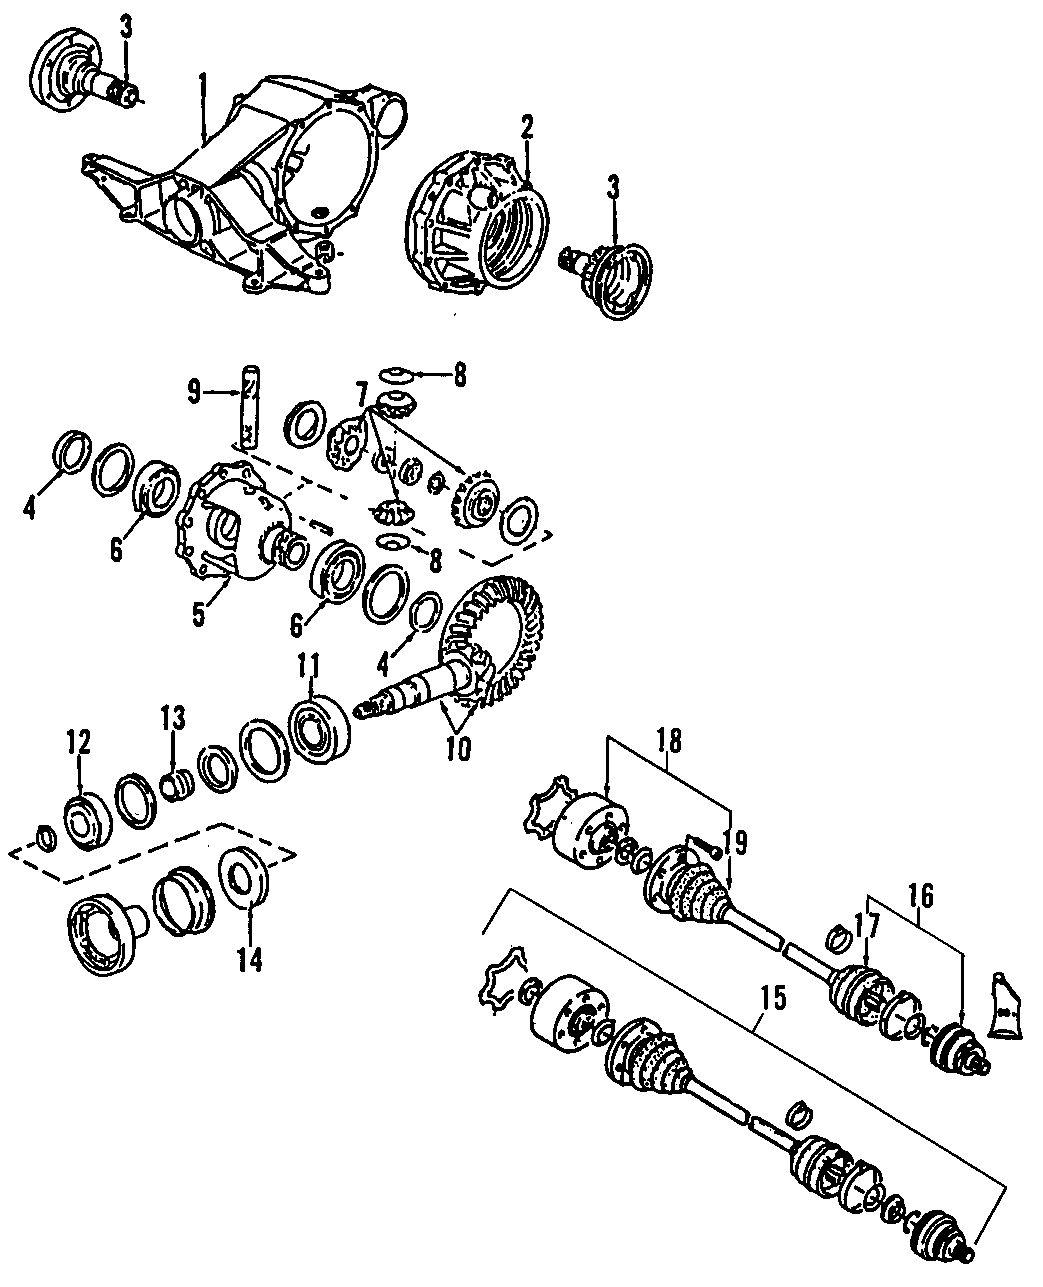 4DRIVE AXLES. REAR AXLE. AXLE SHAFTS & JOINTS. DIFFERENTIAL. PROPELLER SHAFT.https://images.simplepart.com/images/parts/motor/fullsize/F220090.png